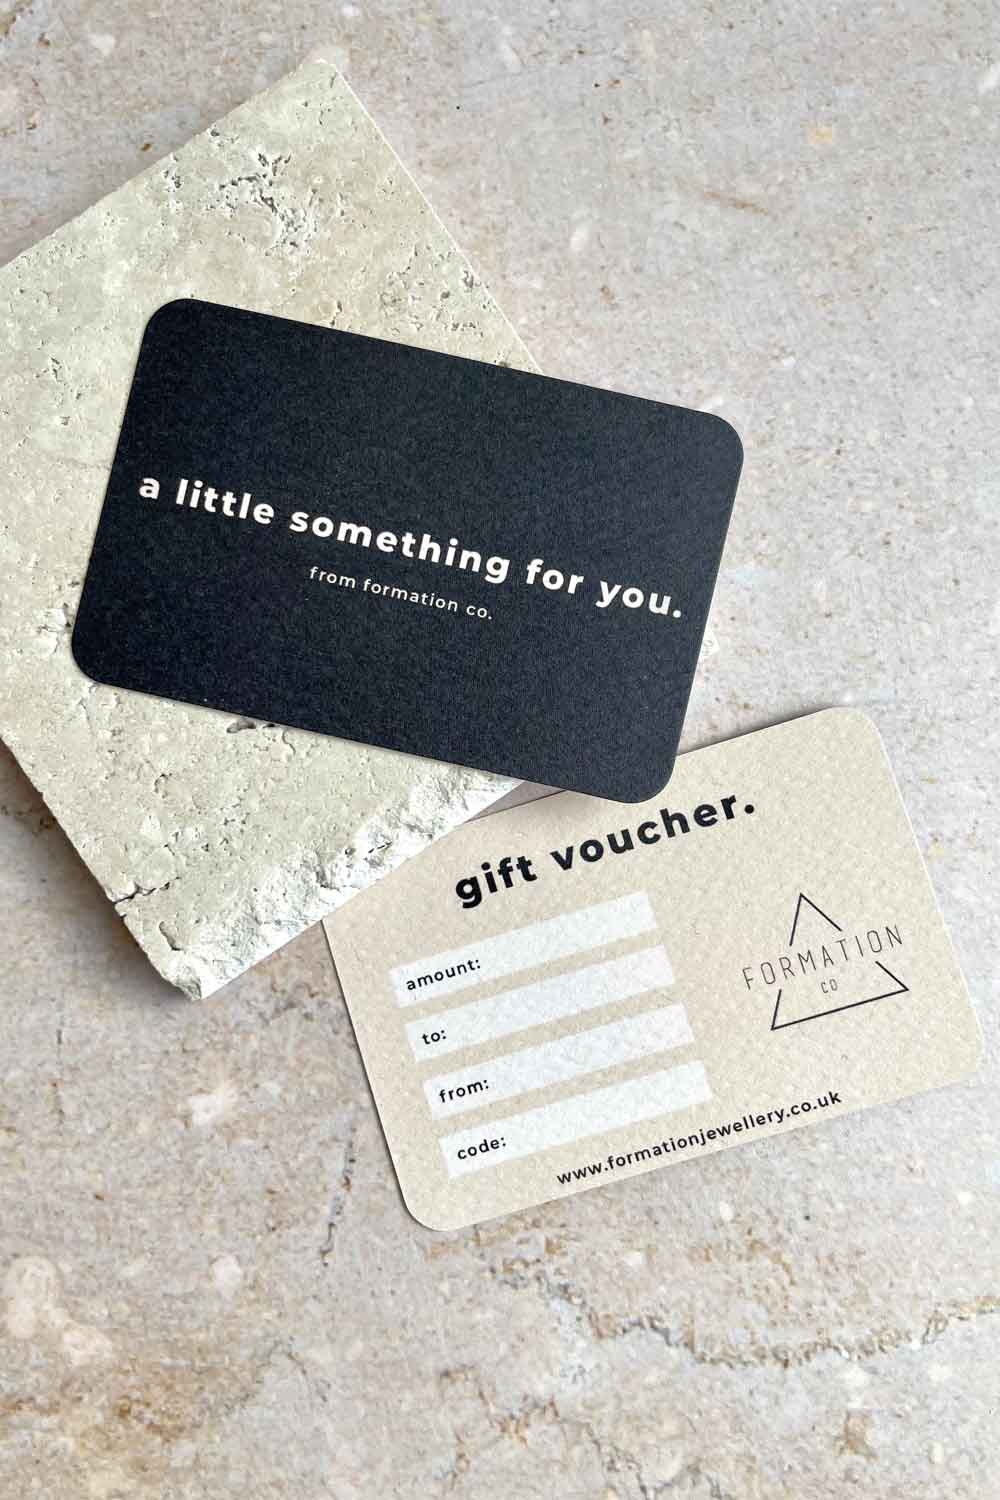 PHYSICAL GIFT CARD